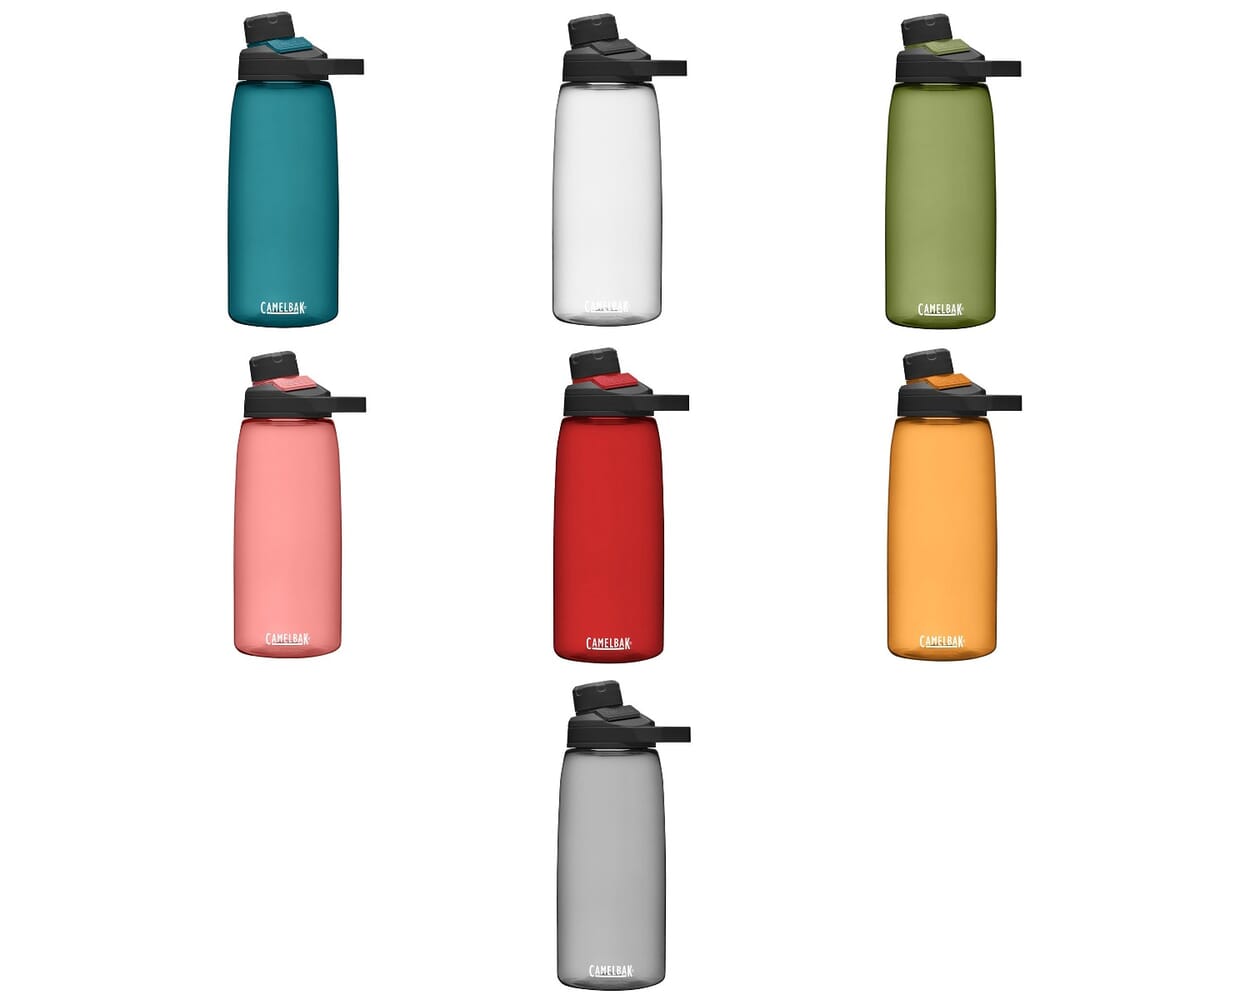 https://assets.thegreenwellystop.co.uk/media/catalog/product/c/a/camelbak-chute-mag-1l-water-bottle.jpg?q=80&canvas.width=1250&canvas.height=1000&canvas.color=ffffff&w=1000&h=1000